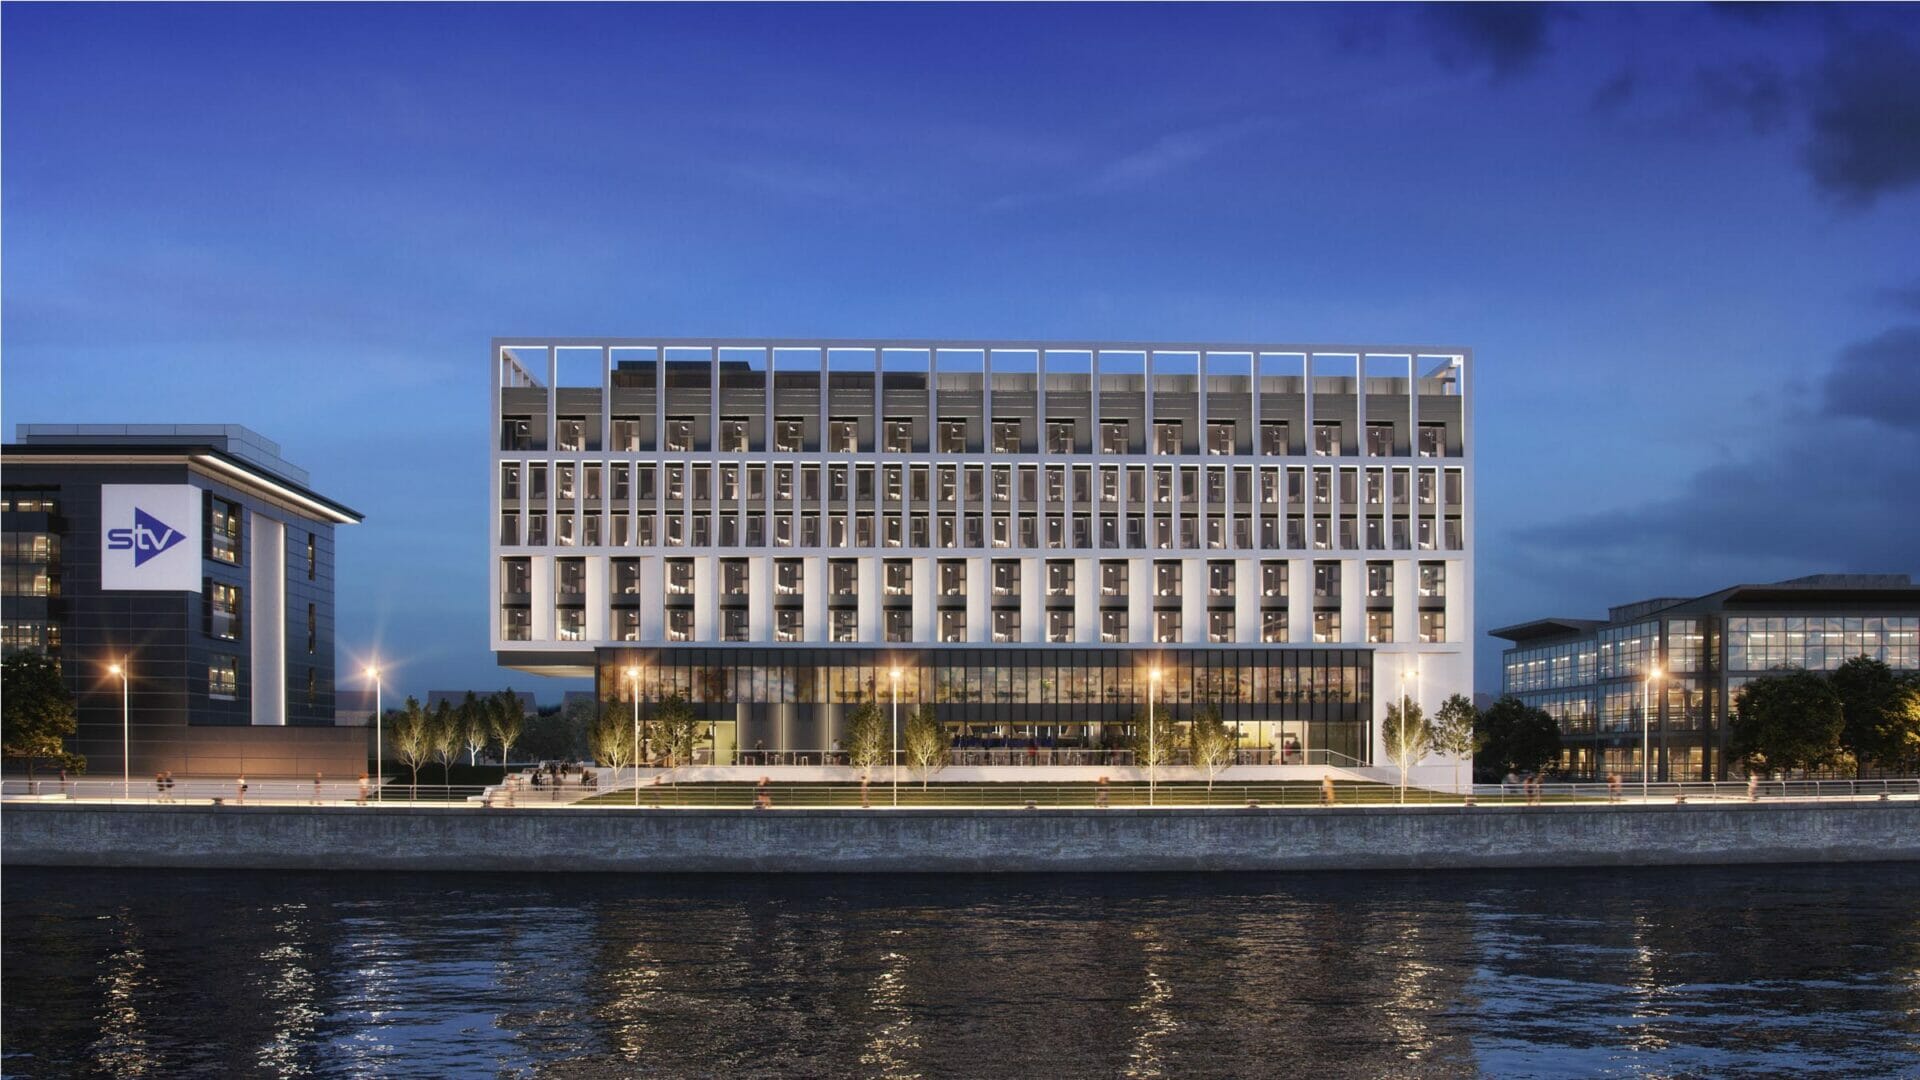 Mosaic Architecture + Design, one of Scotland’s most experienced practices, has secured Glasgow City Council planning approval to build an £18M Holiday Inn Pacific Quay hotel on the site of the former Glasgow Garden Festival.